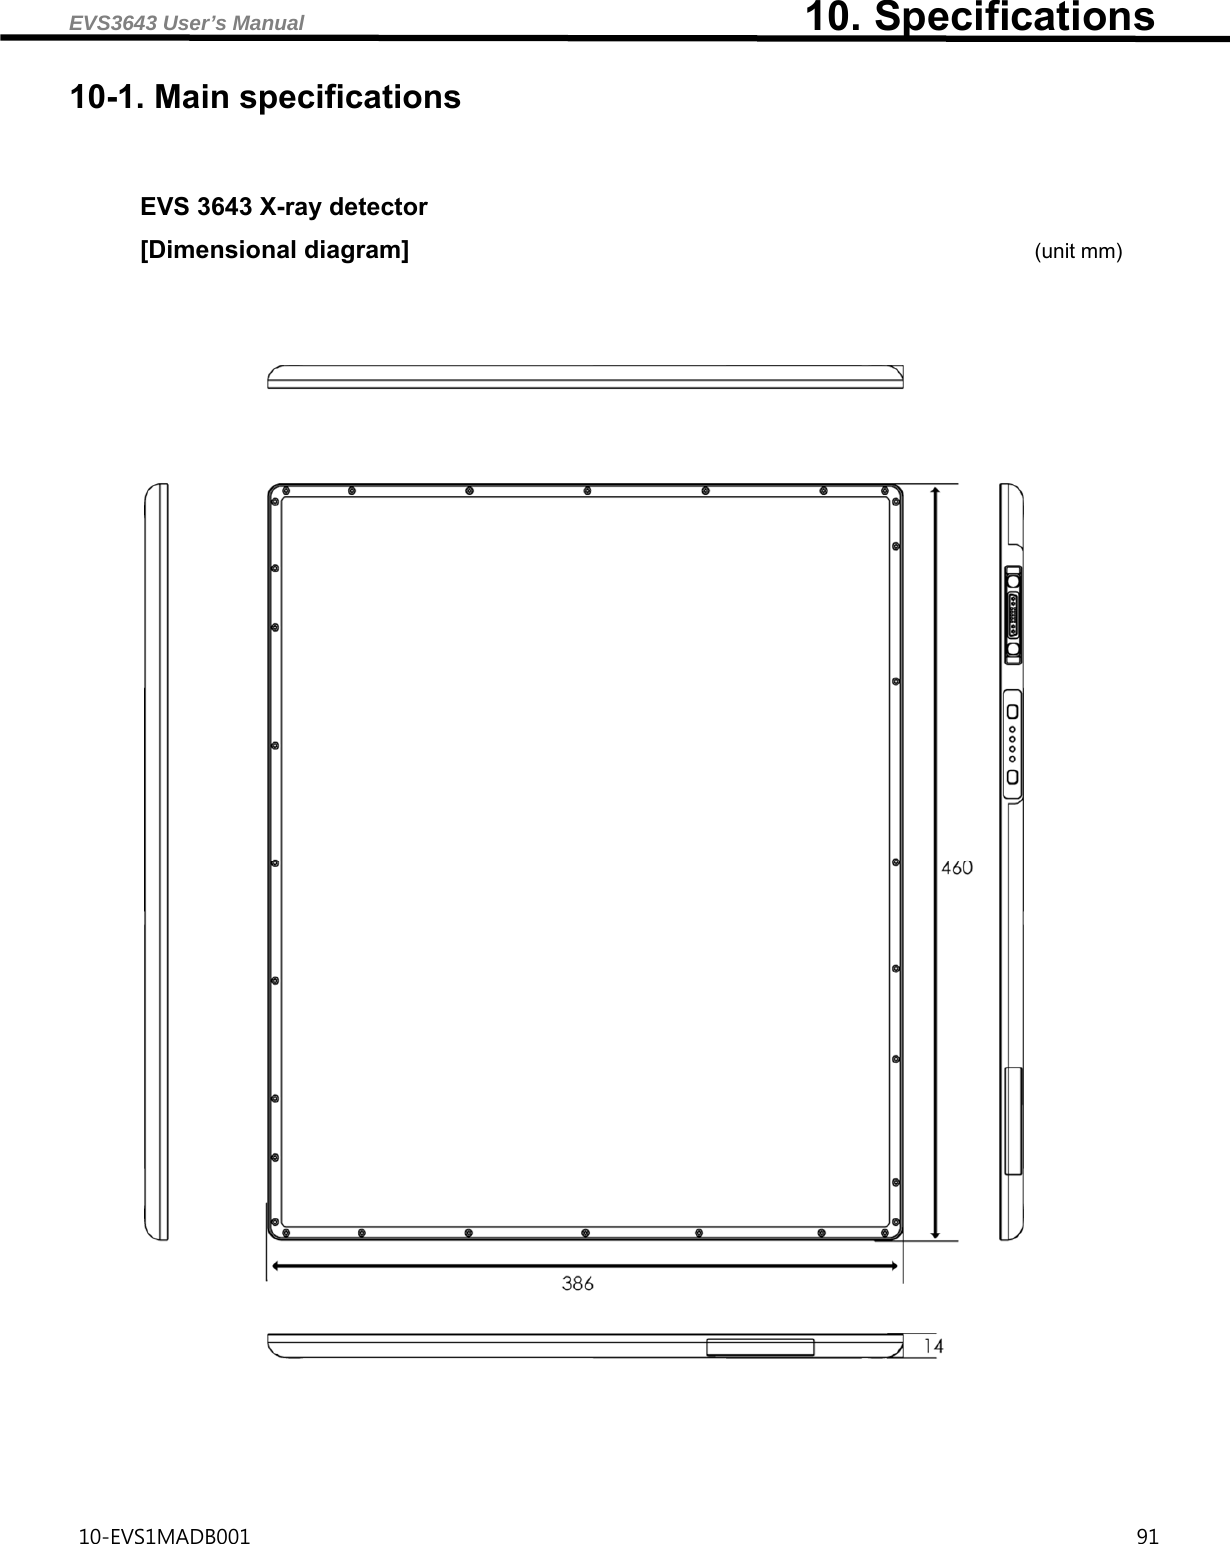 EVS3643 User’s Manual                                                10. Specifications 10-EVS1MADB001                                                                                     91  10-1. Main specifications  EVS 3643 X-ray detector [Dimensional diagram]                                                  (unit mm)       